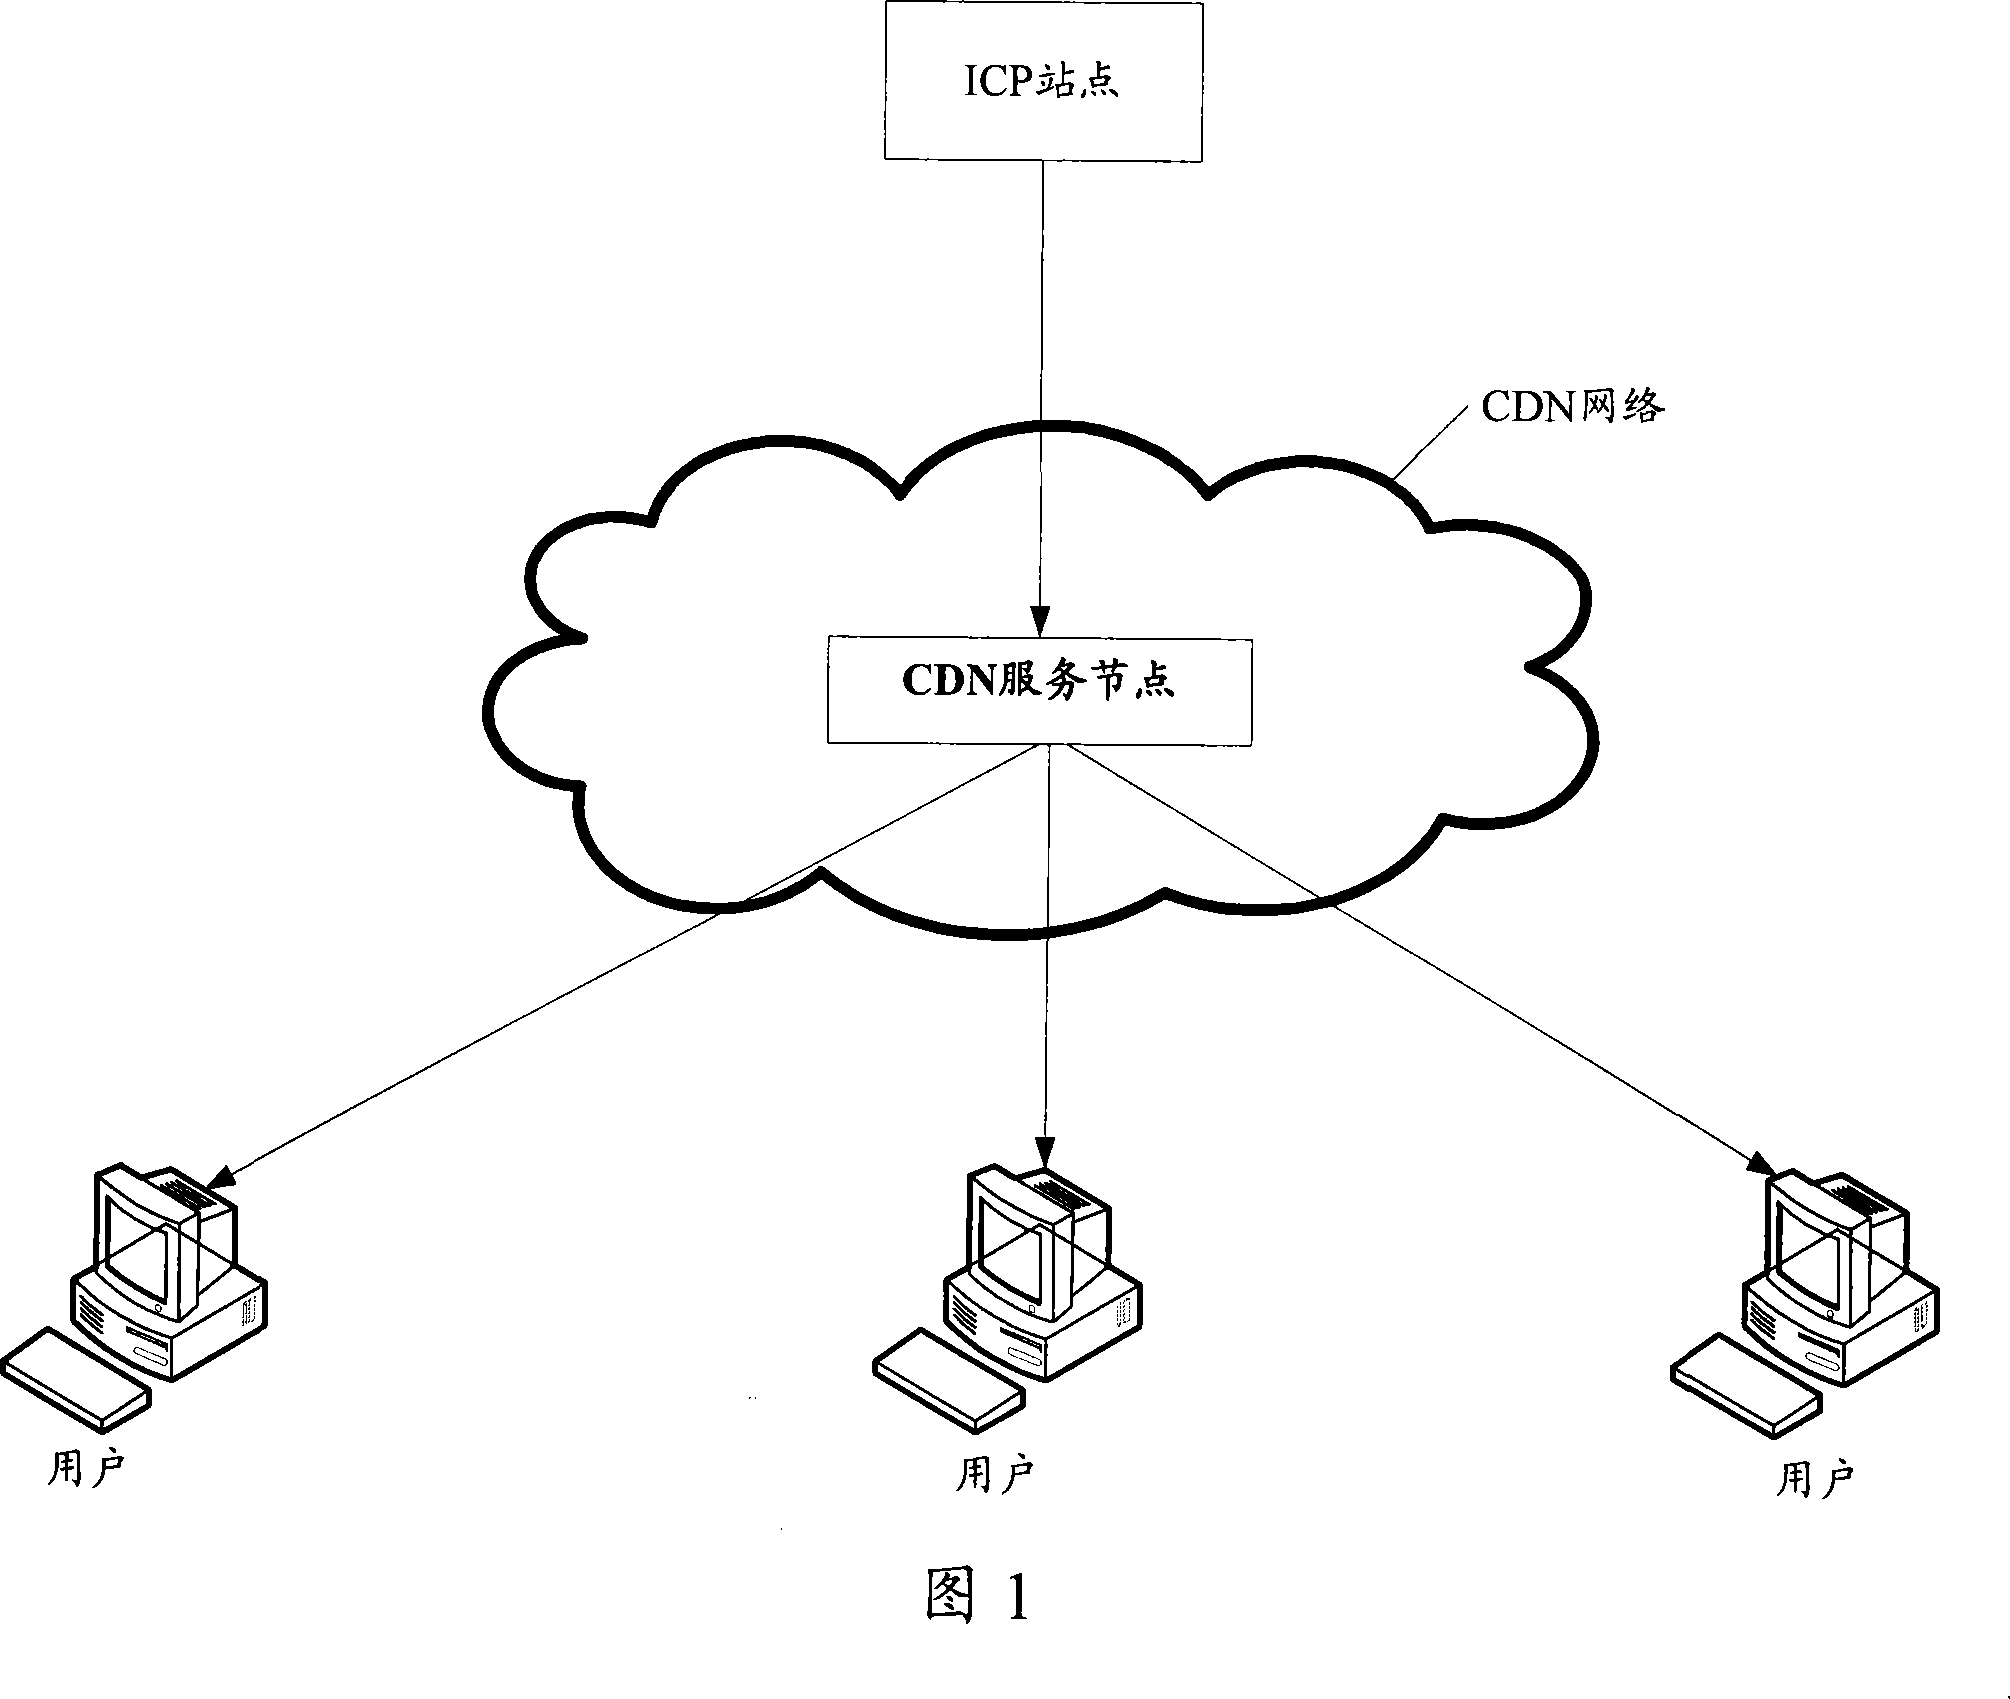 Stream media living broadcasting system, method and device based on content distribution network